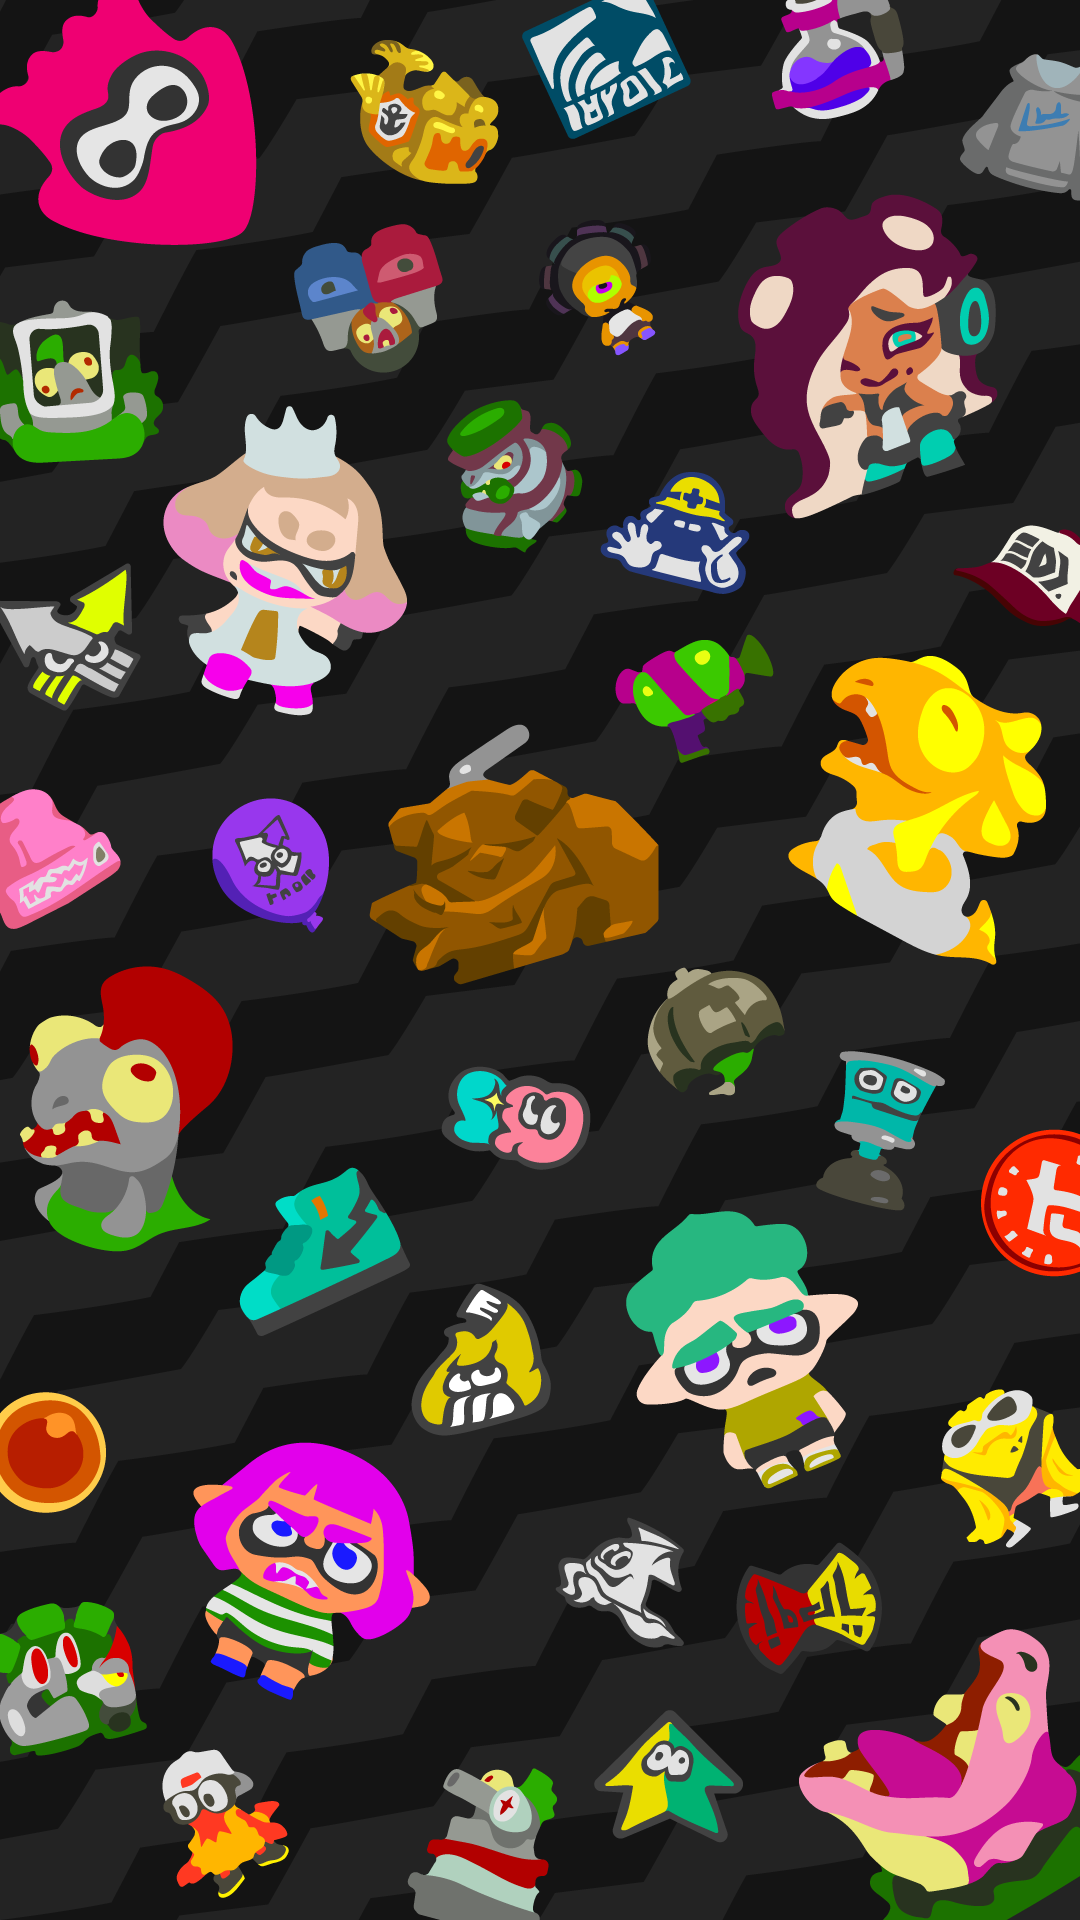 Splatnet2 Gave Out A Phone Background 1080x19 I Made A 19x1080 Version For Desktop If You Guys Want It I Didn T Just Rotate It That Would Look Bad Splatoon